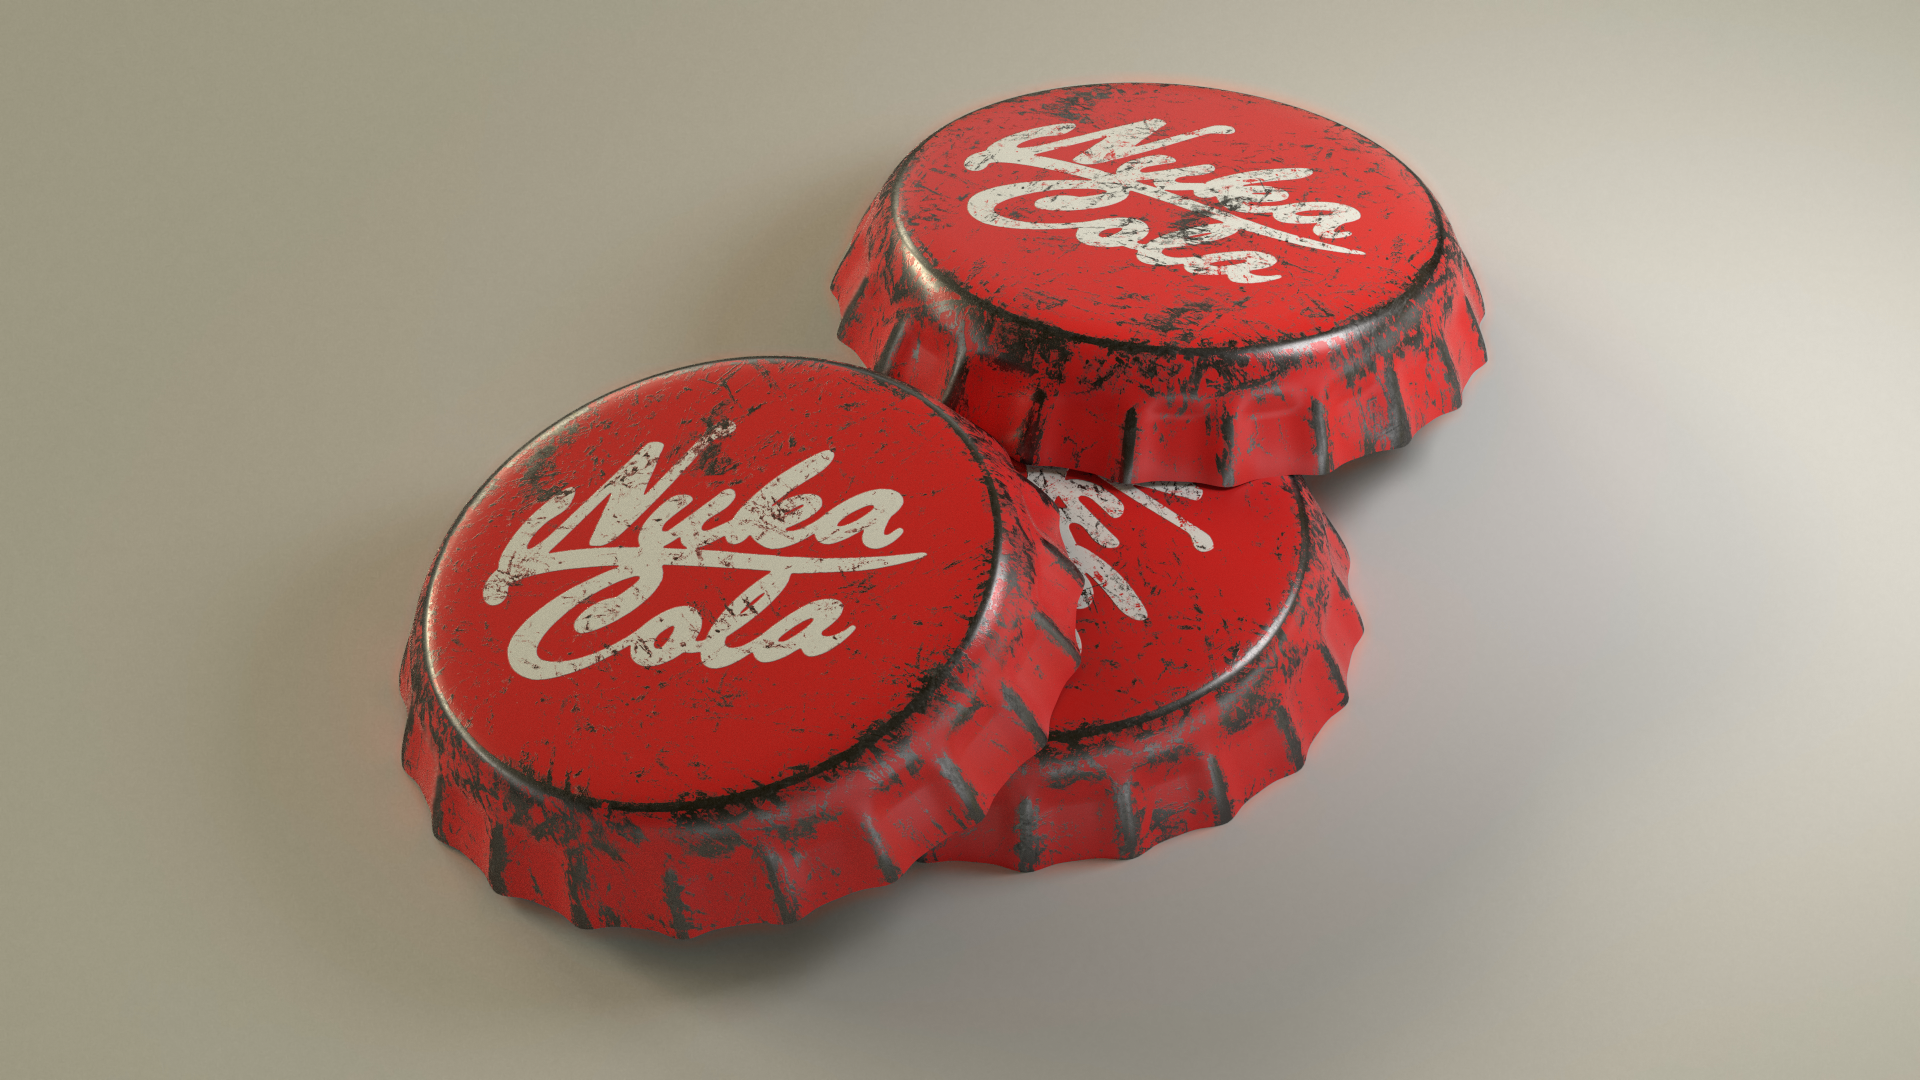 General 1920x1080 Fallout 3 Nuka-Cola Bottle Caps Fallout video game art red Bottle Tops PC gaming video games simple background